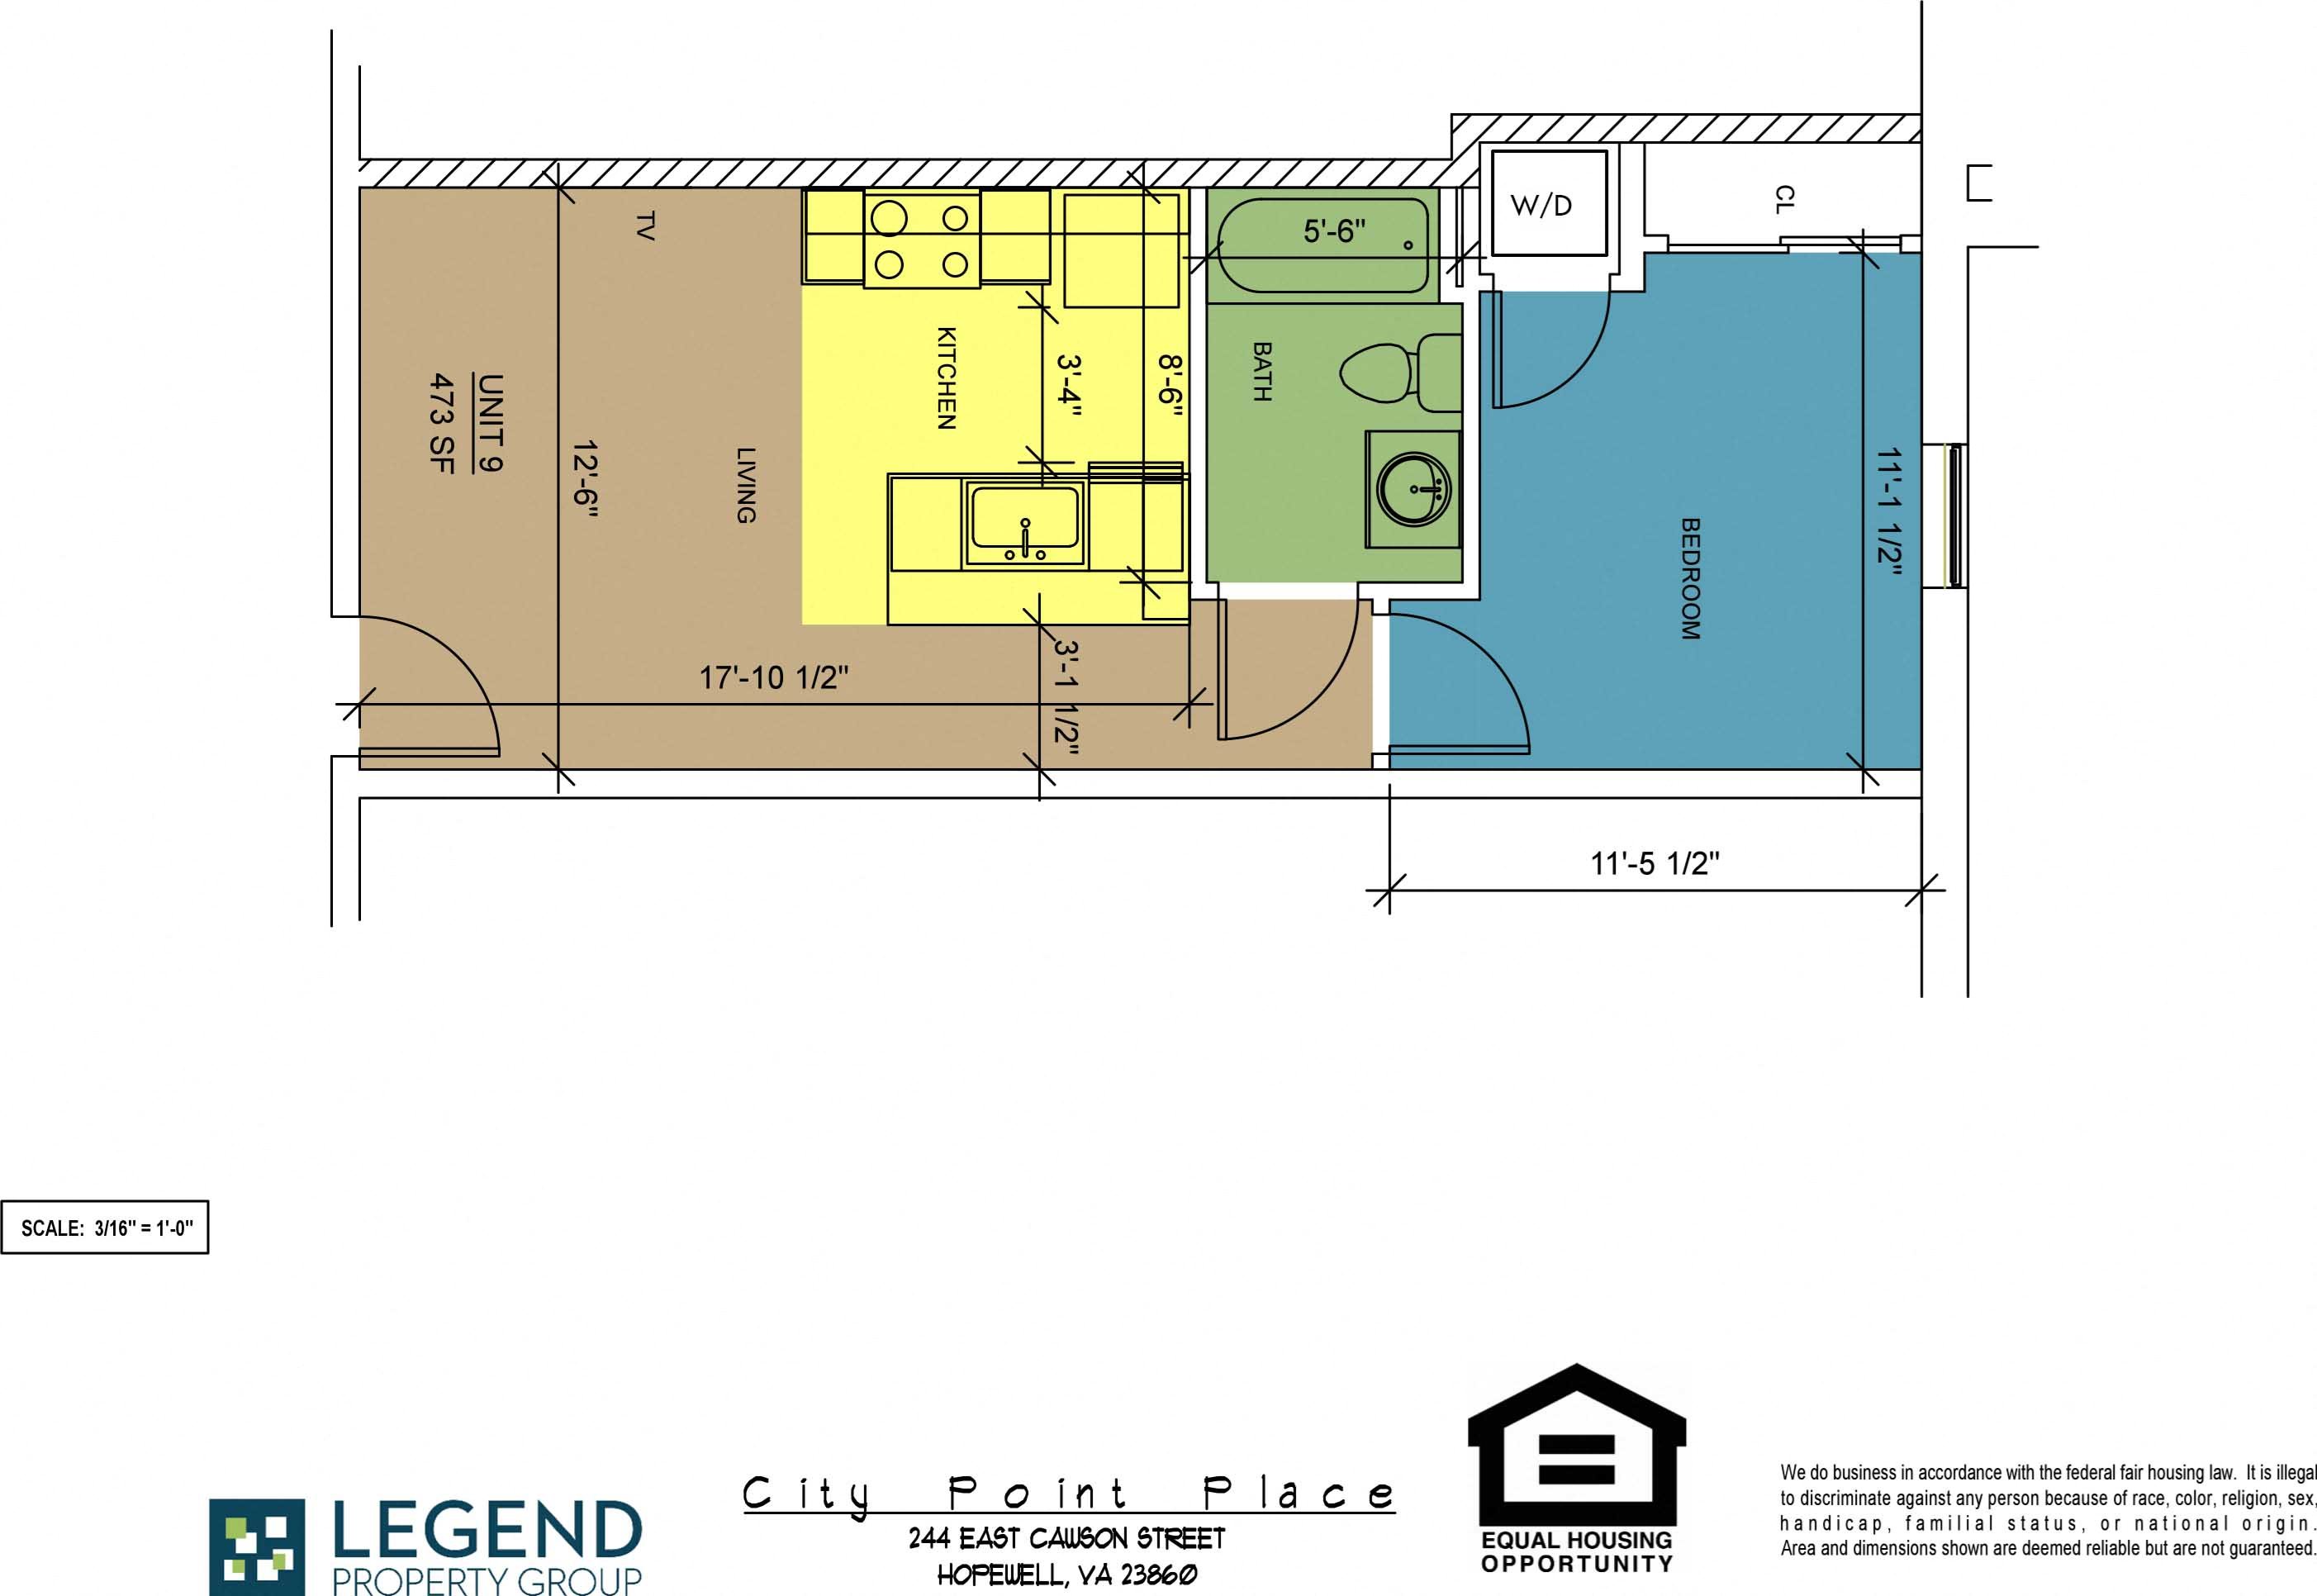 Floor Plans of City Point Place in Hopewell, VA